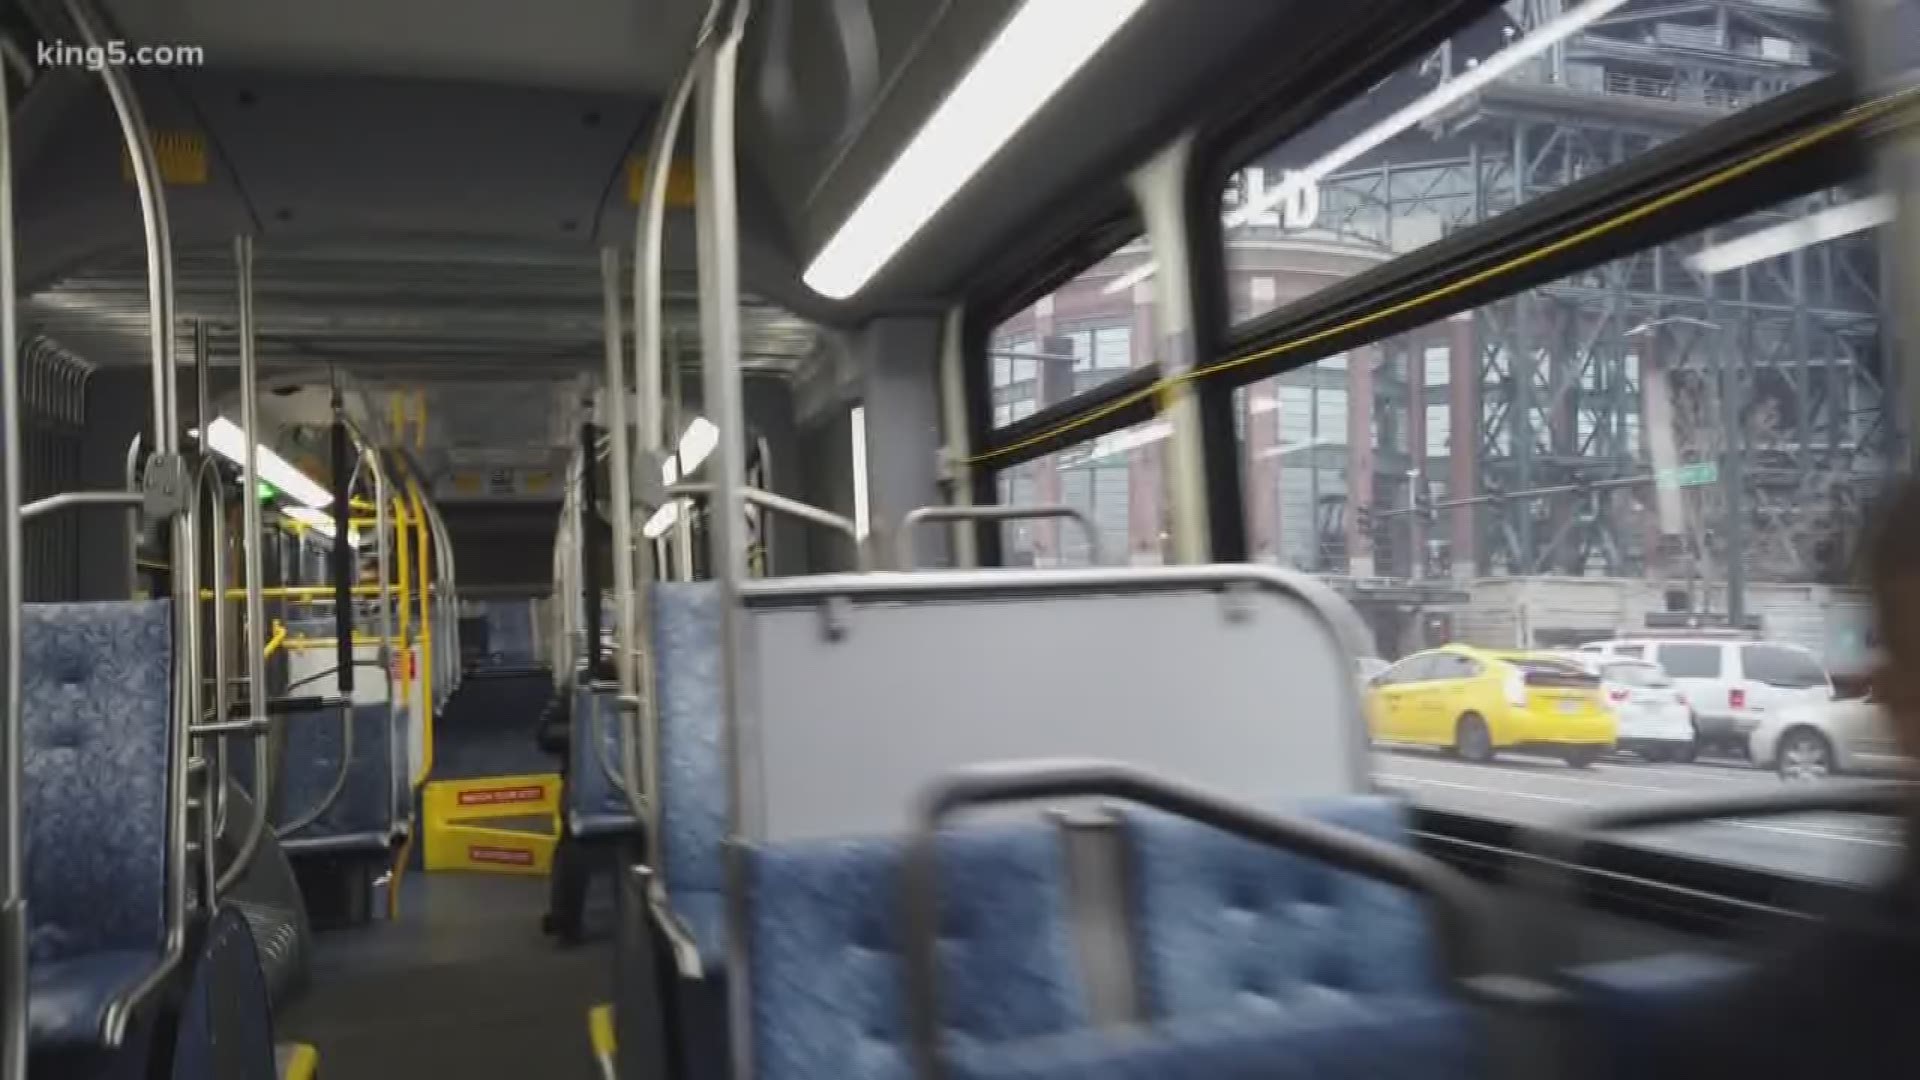 KING 5's Michael Crowe spend today on buses of Seattle, talking about tips and tricks for the period of maximum constraint.